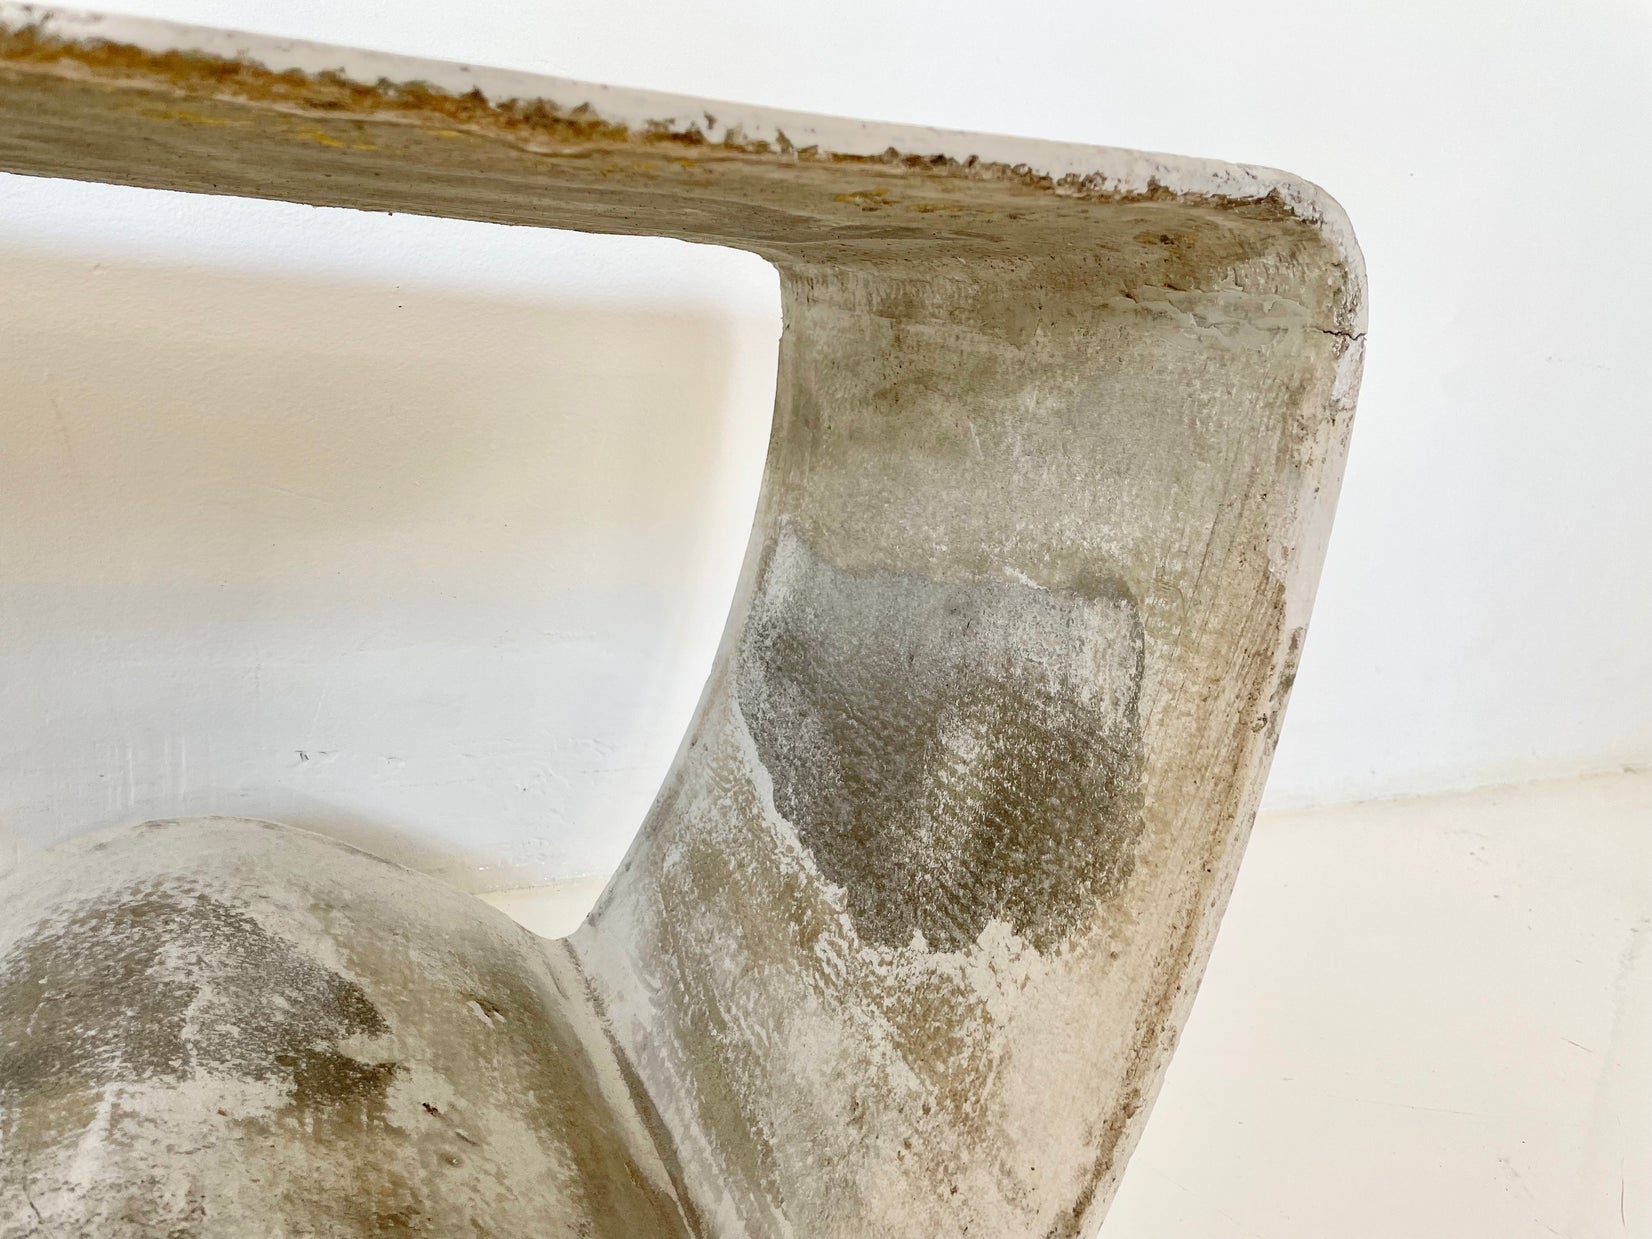 Ludwig Walser for Eternit Concrete Stool